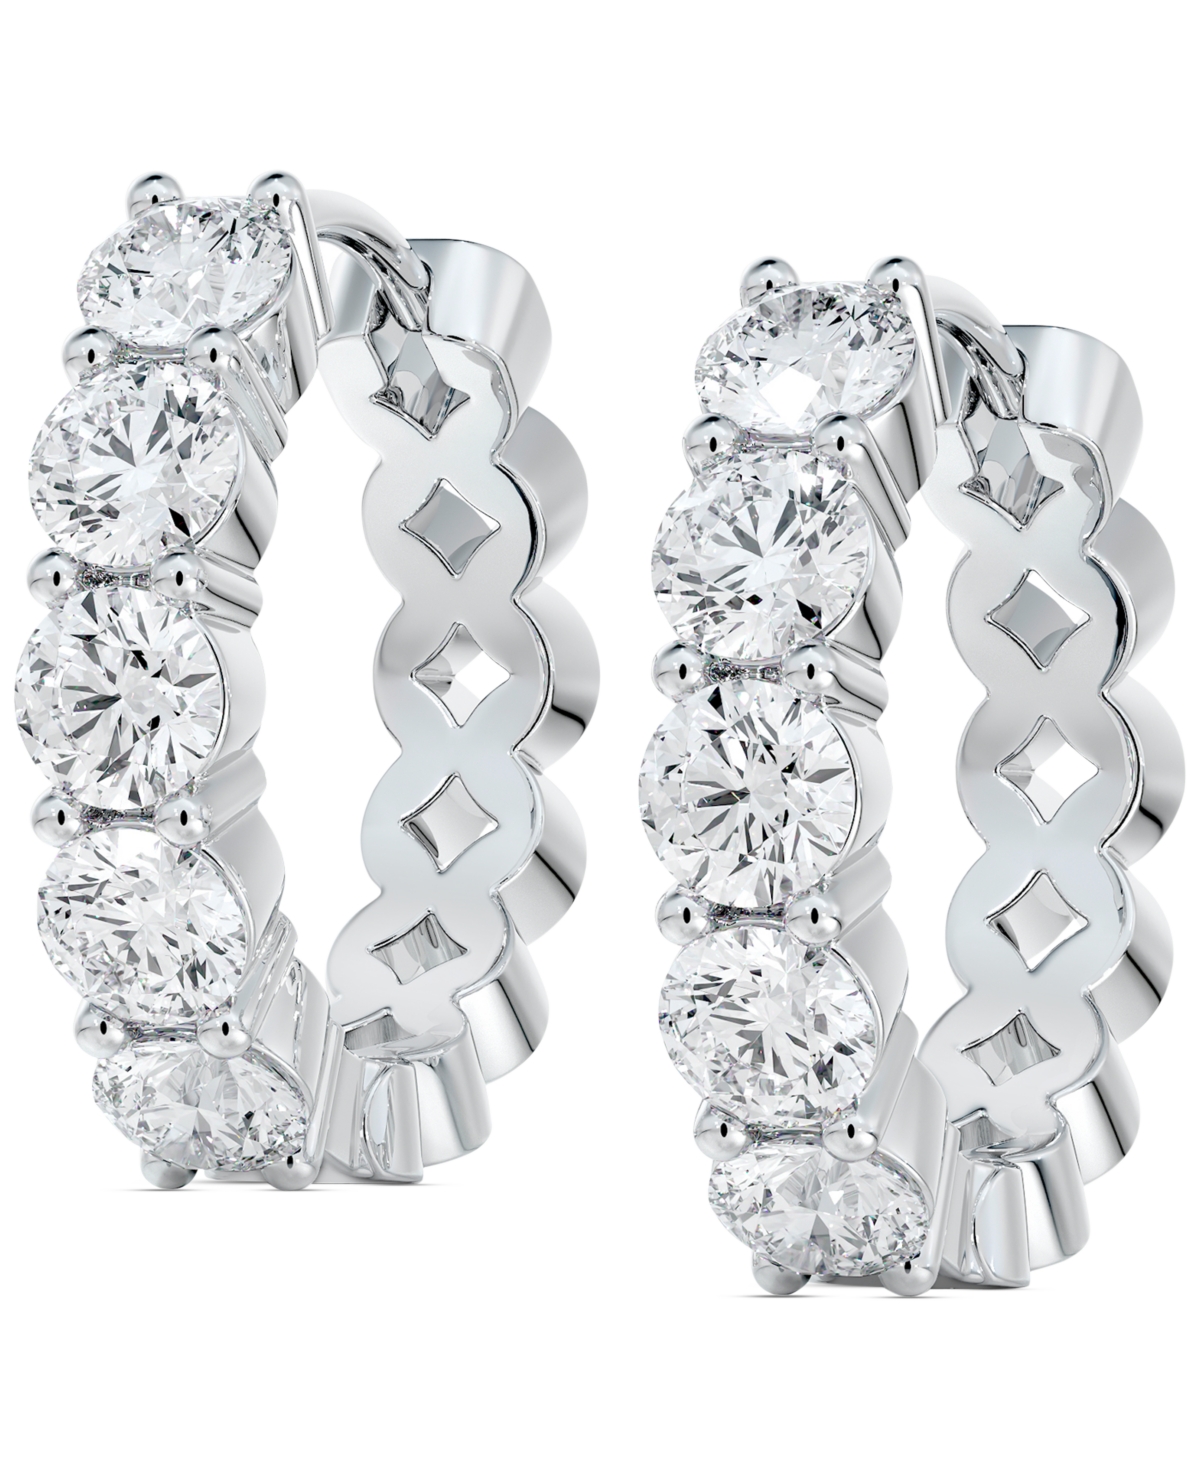 Portfolio by De Beers Forevermark Diamond Extra Small Hoop Earrings (3/4 ct. t.w.) in 14k White Gold, 0.385" - White Gold